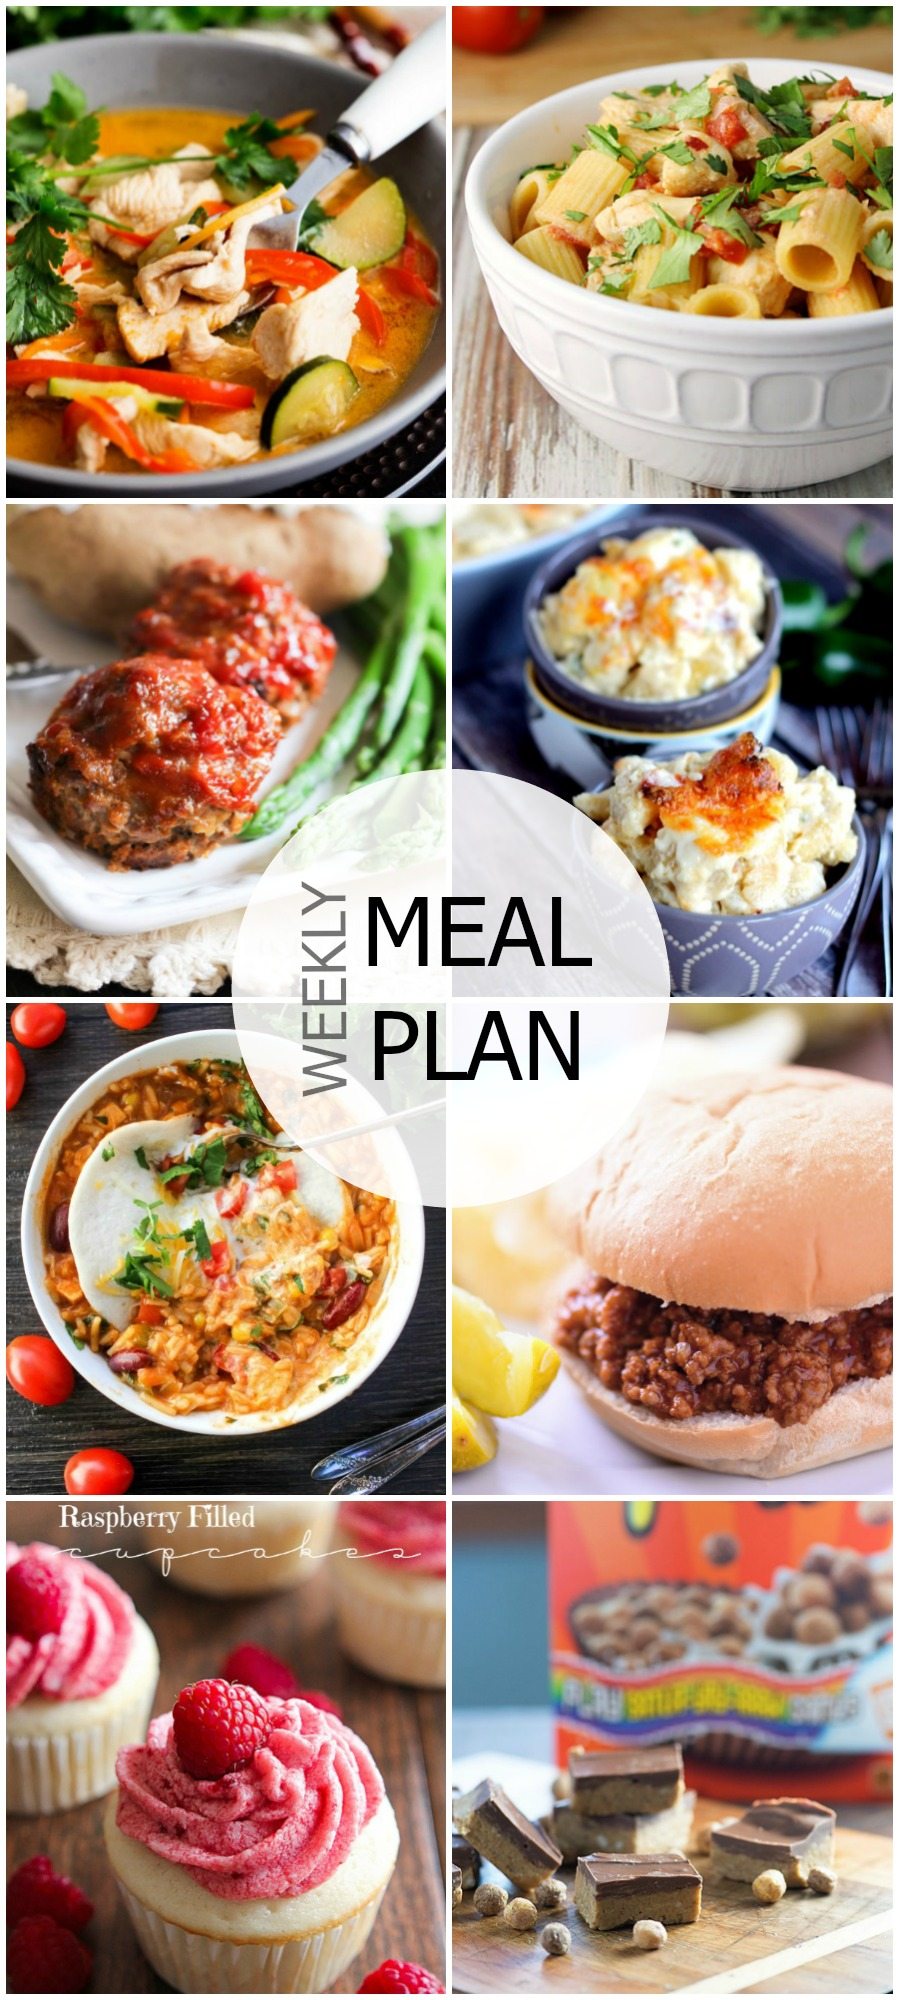 Pinterest meal plan 36 - High Heels and Grills